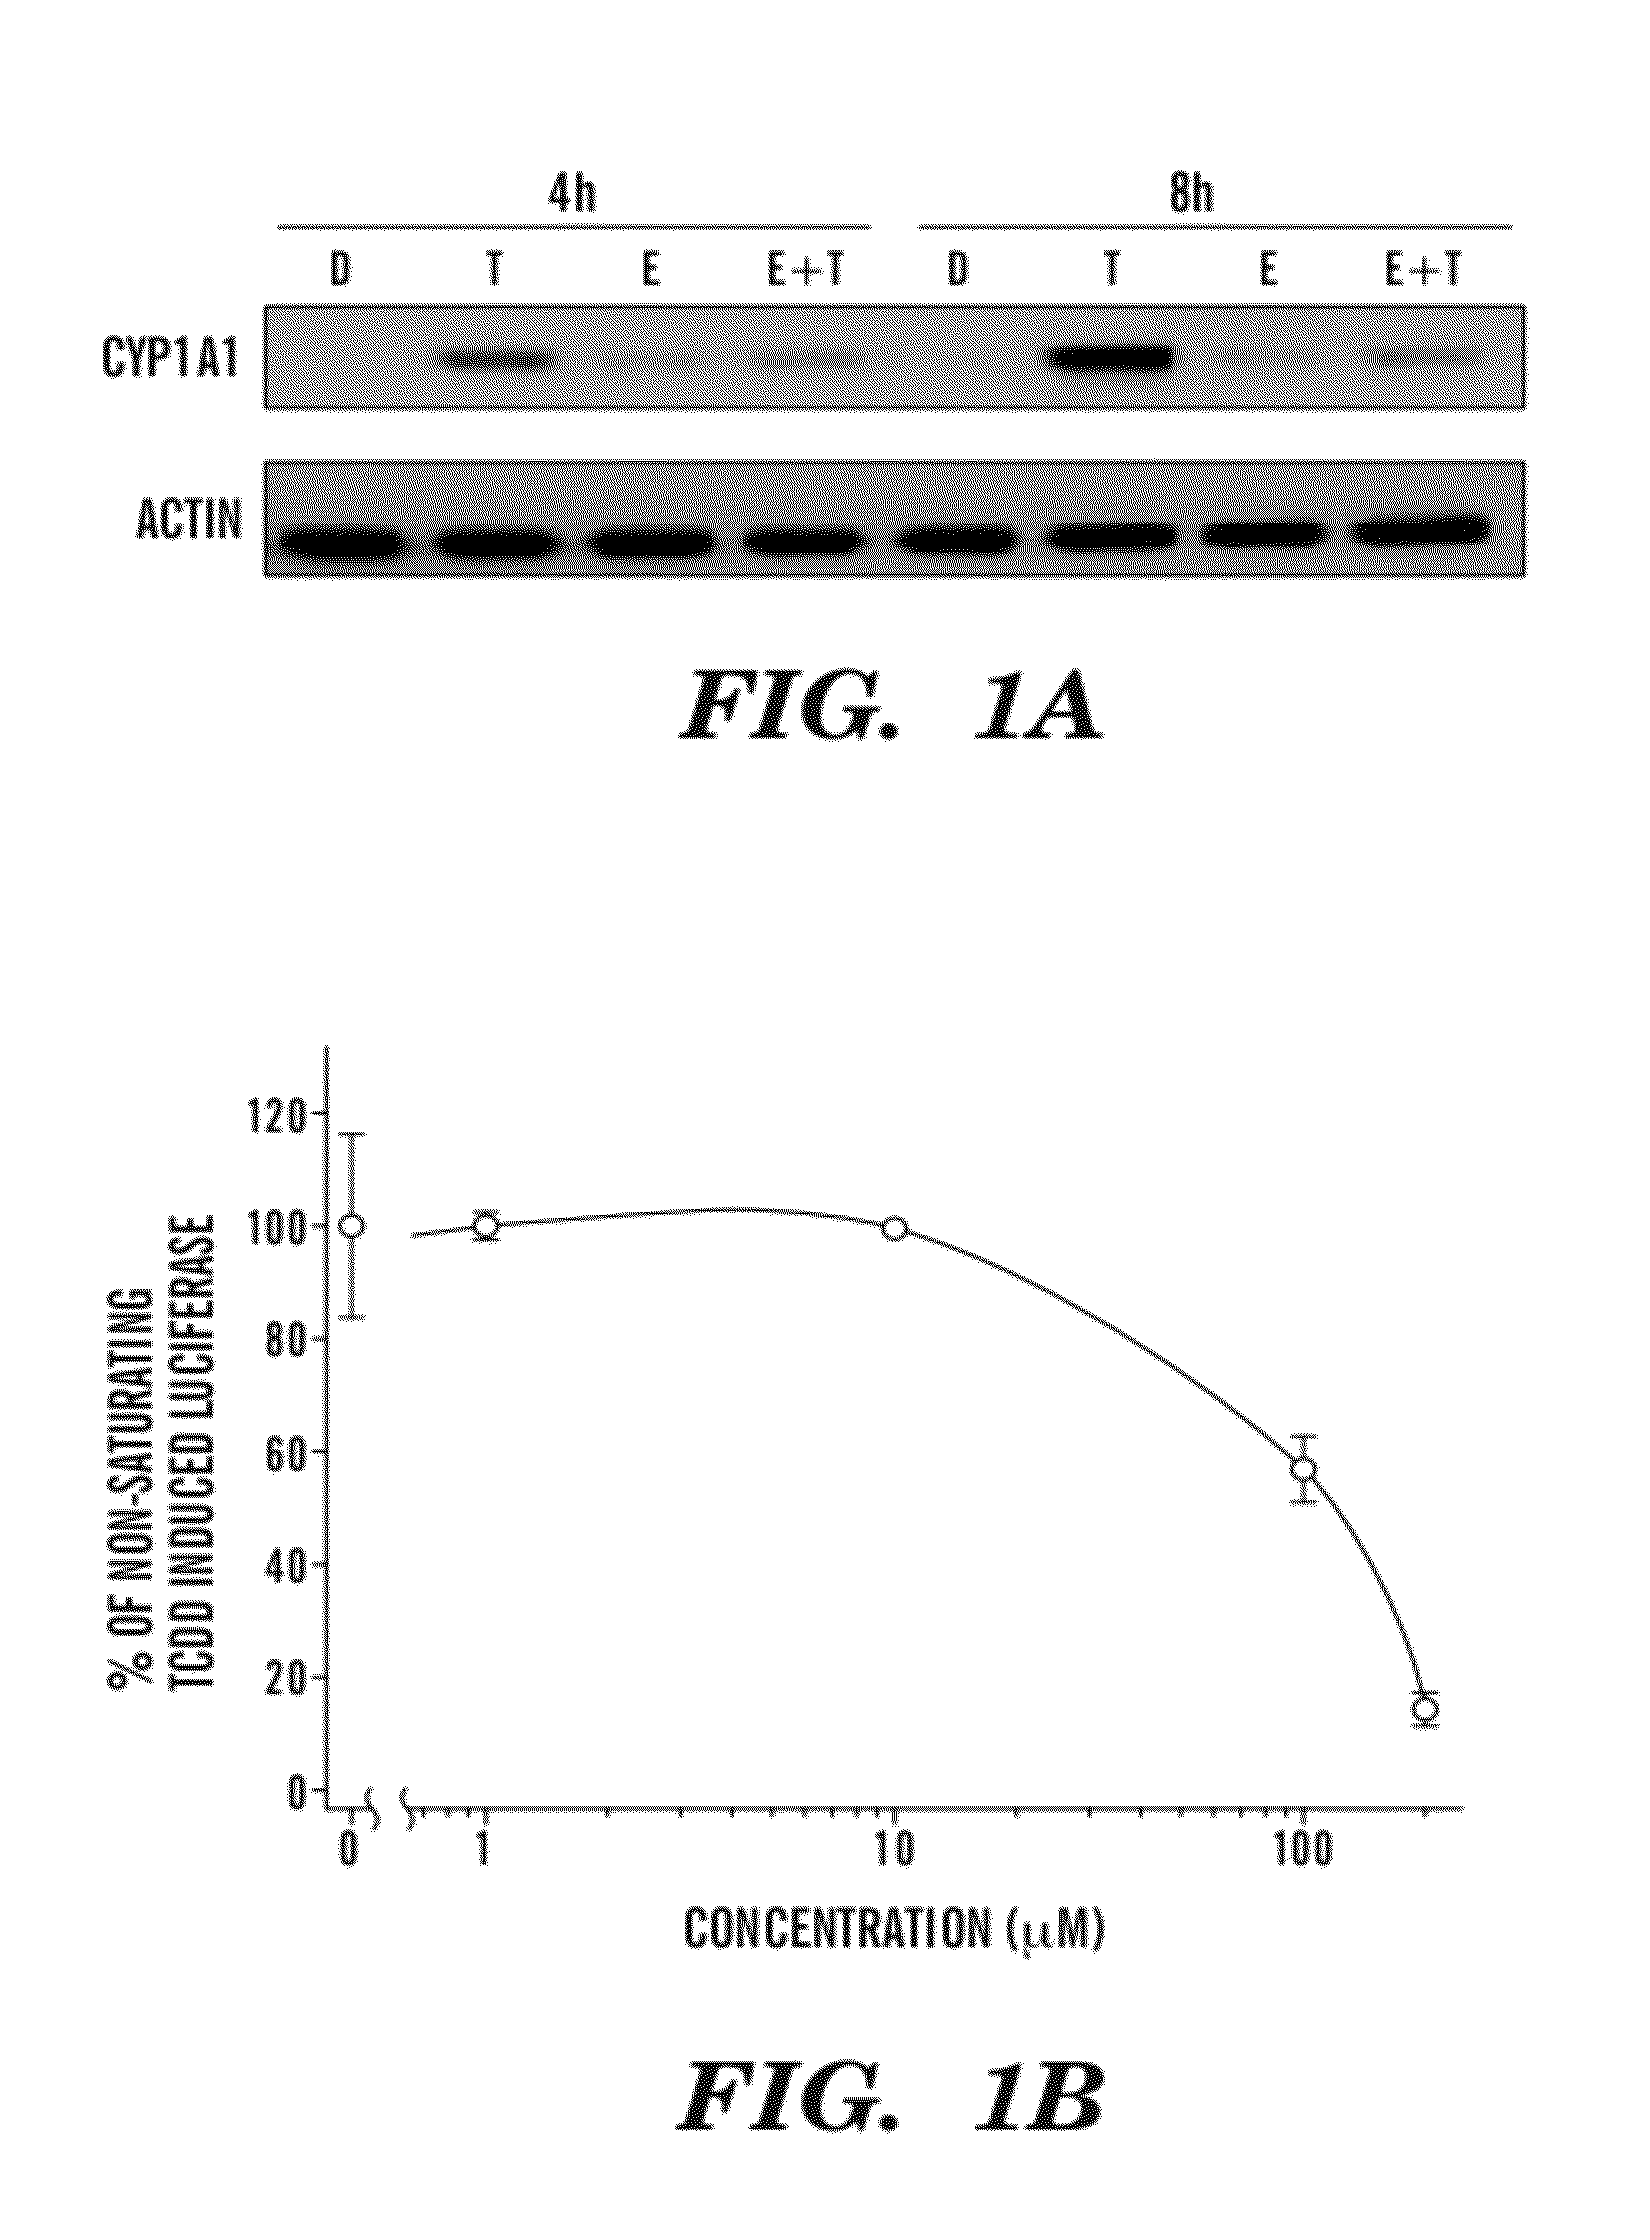 Methods of inhibiting the activity of hsp90 and/or aryl hydrocarbon receptor